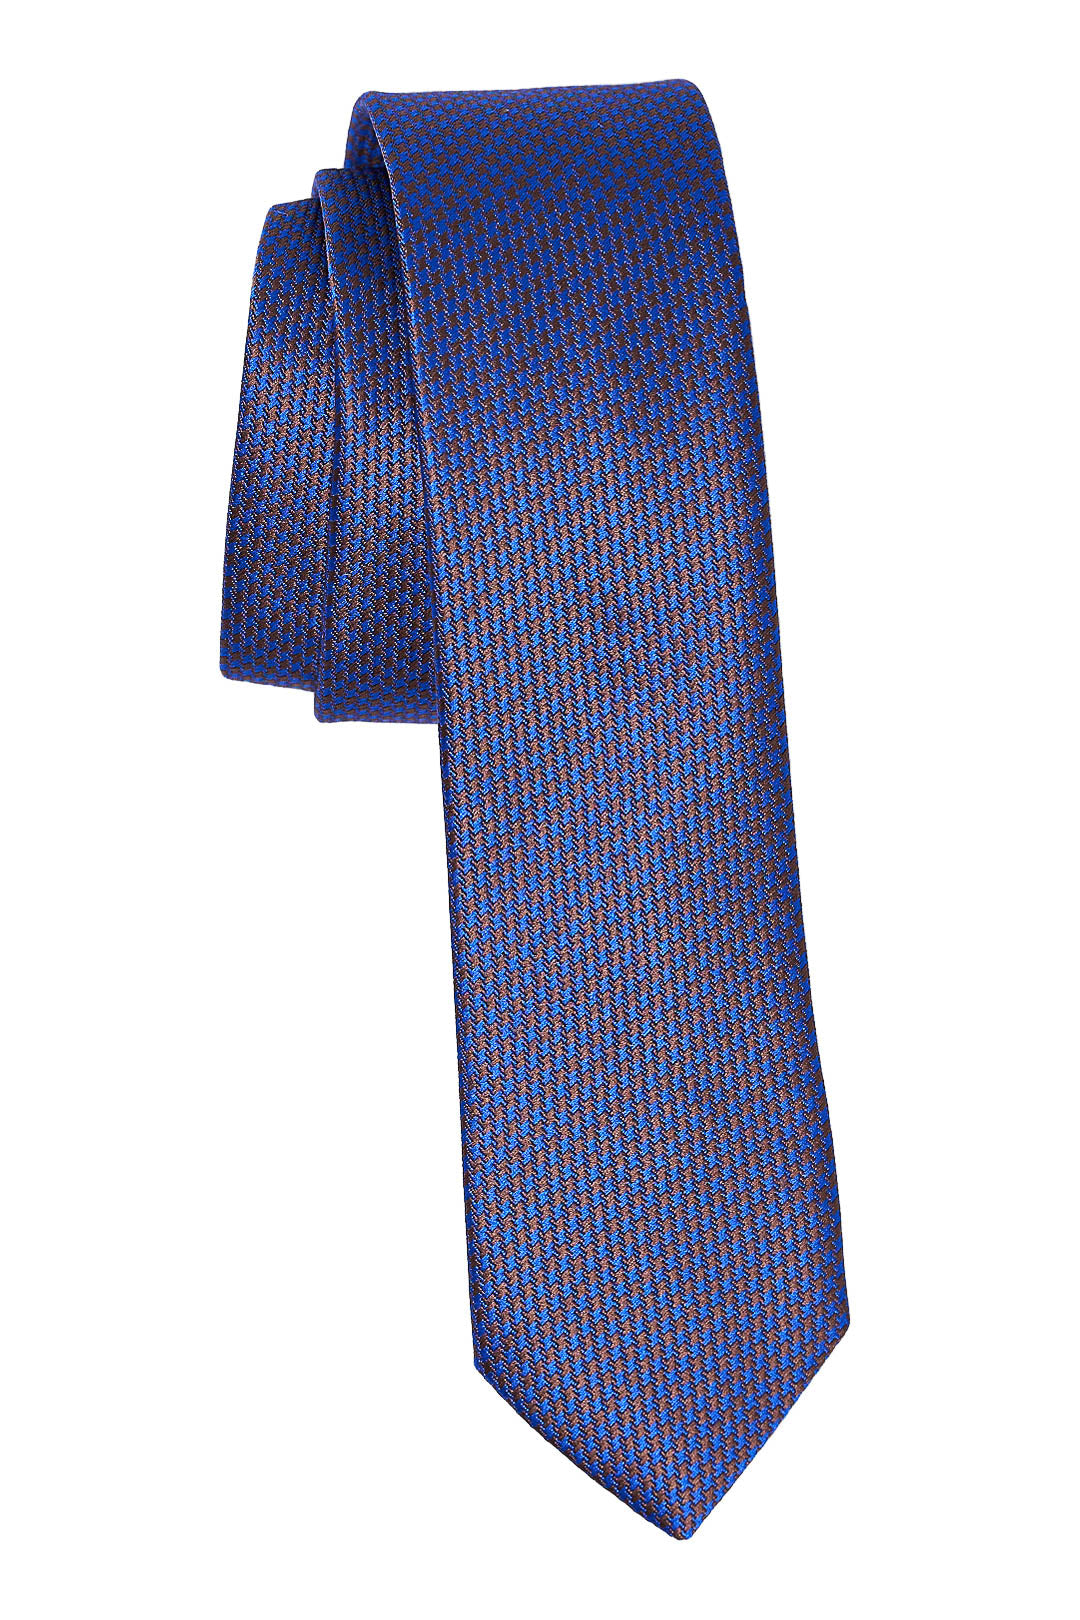 Embroidered Blue & Brown Tie